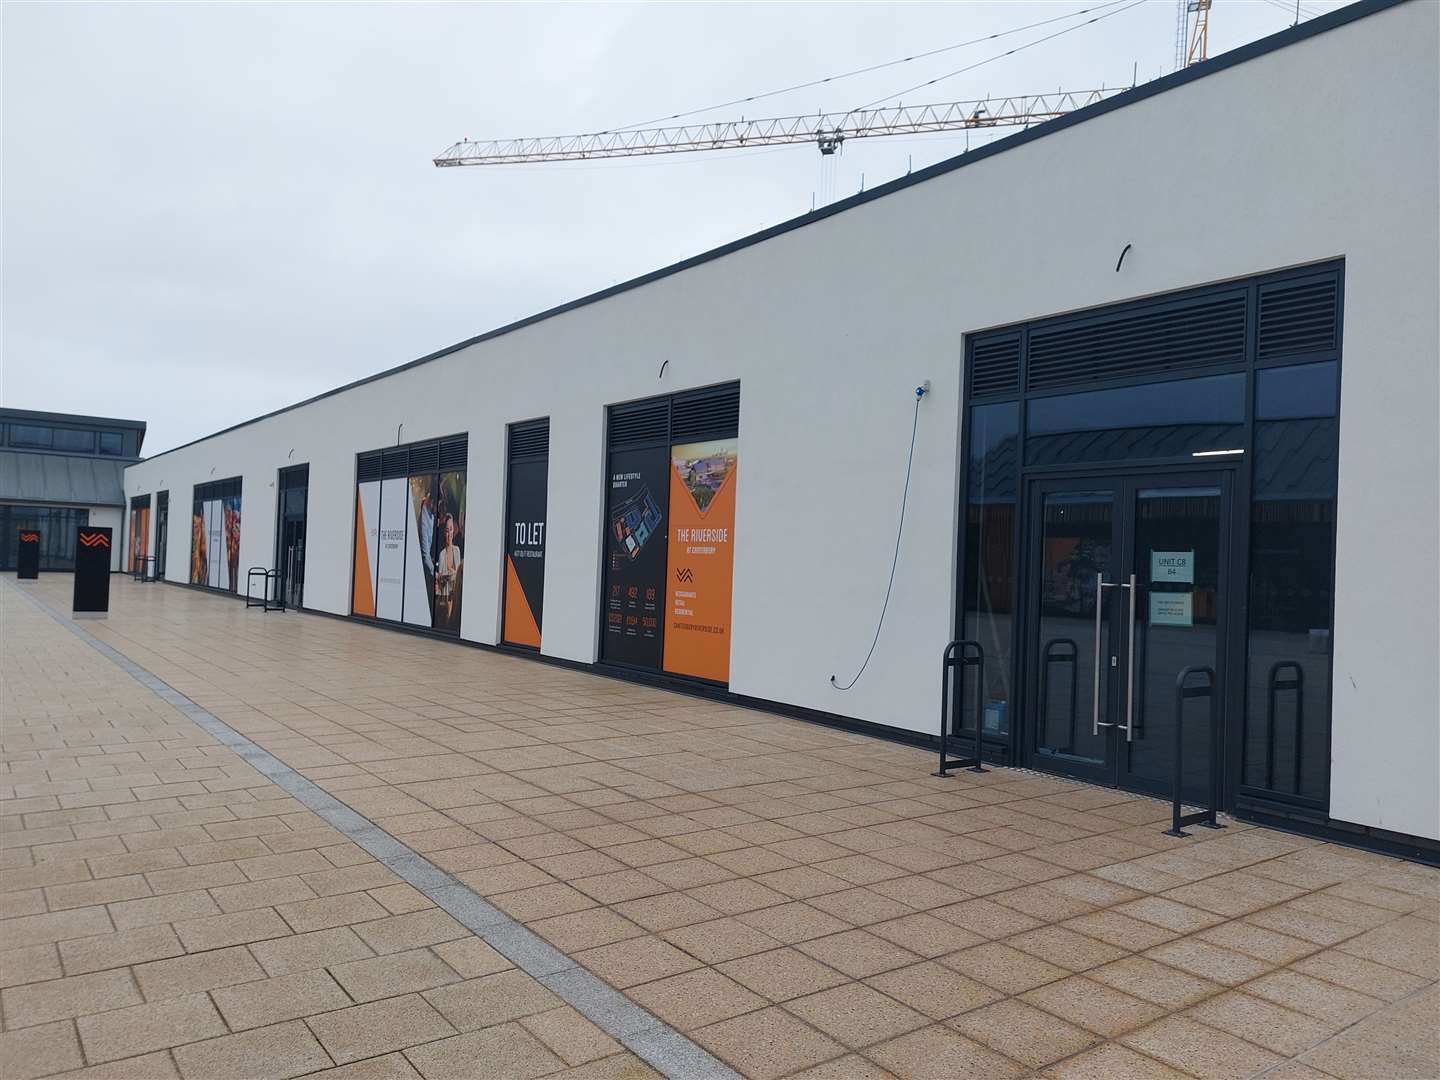 More businesses are expected to move into the Riverside development in Canterbury